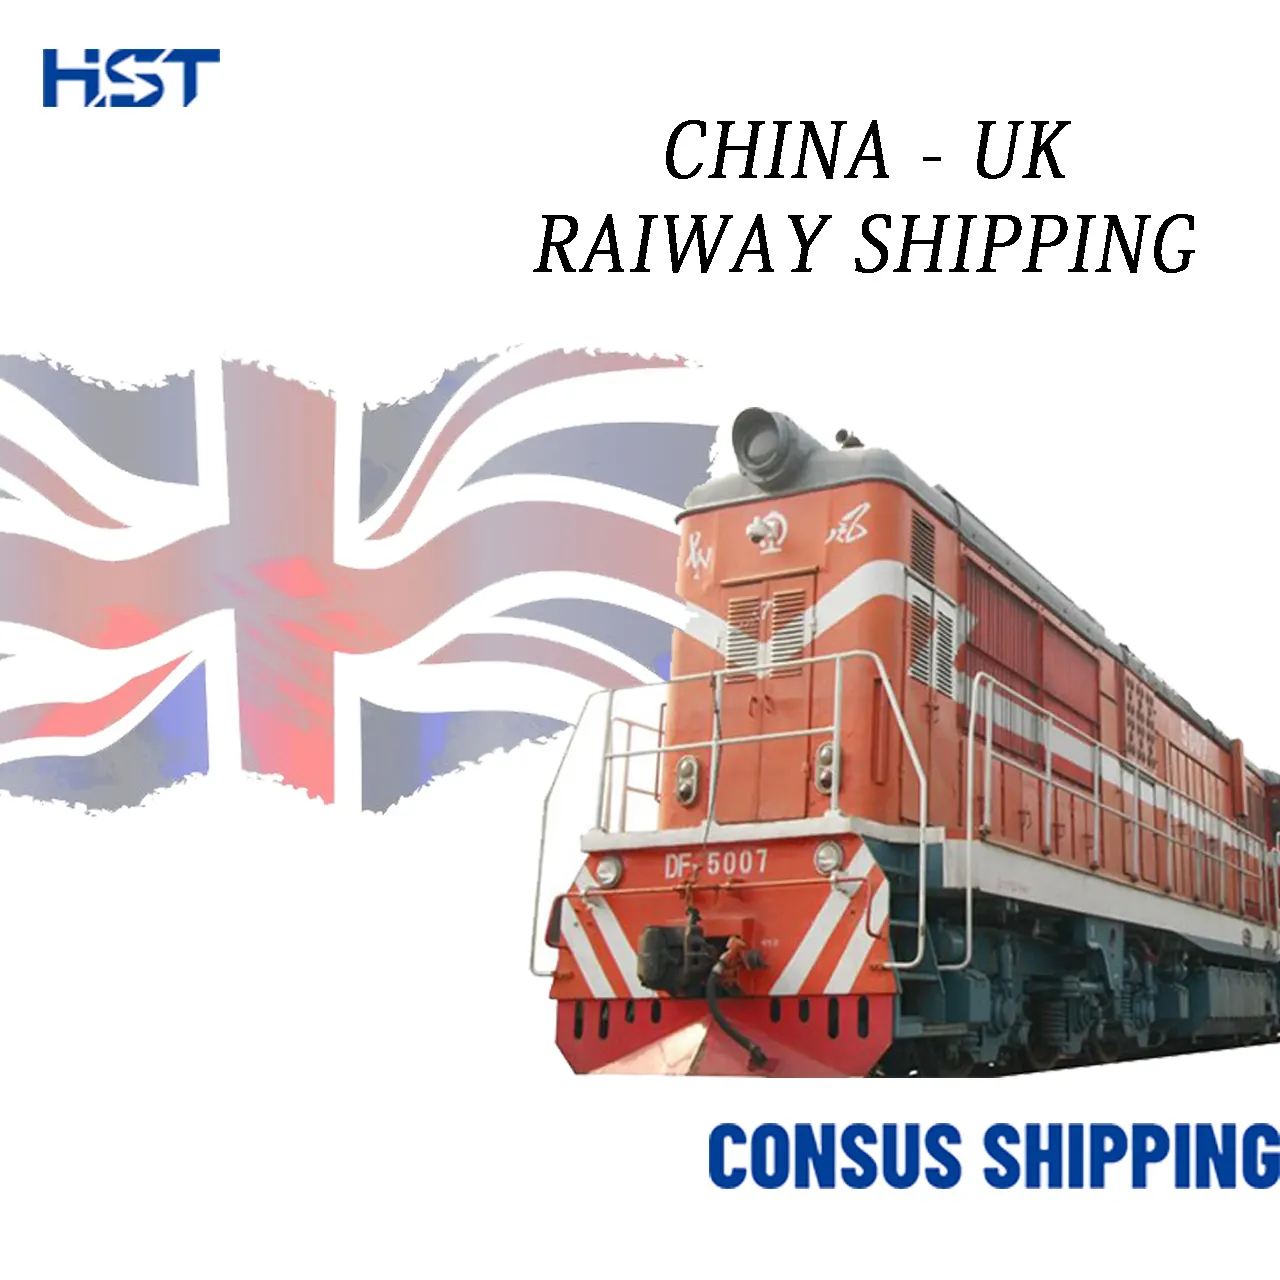 Amazon Fufillment Center Door To Door Delivery Fba Shipping By Train Railway Express From China Freight Forwarder To Uk